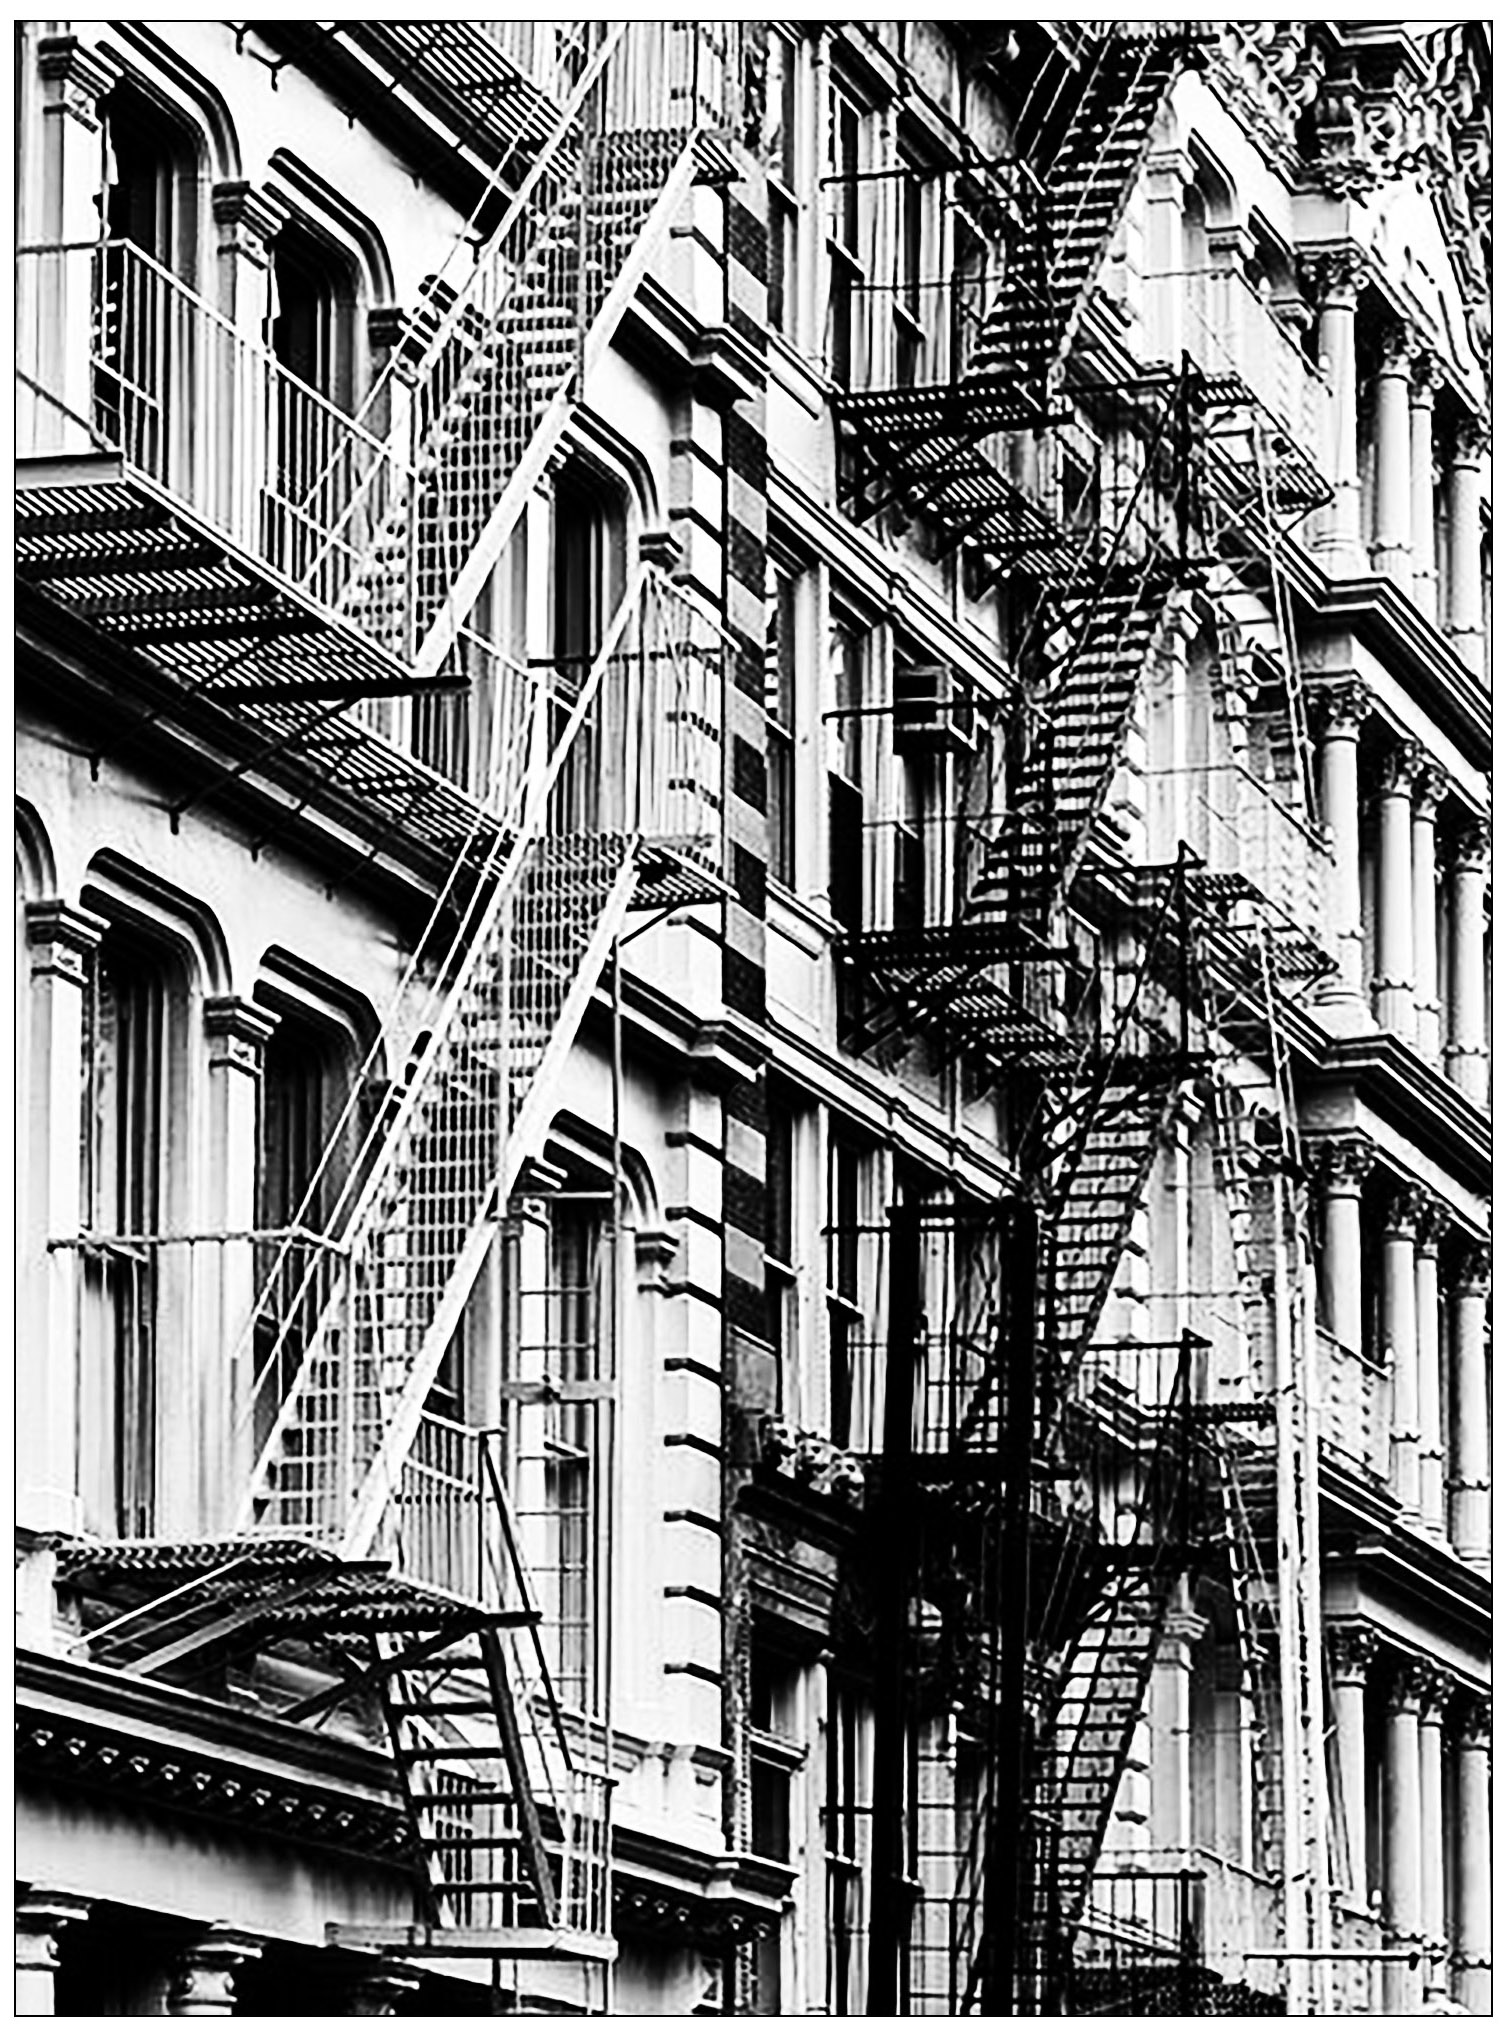 Typical stairs in China Town, New York